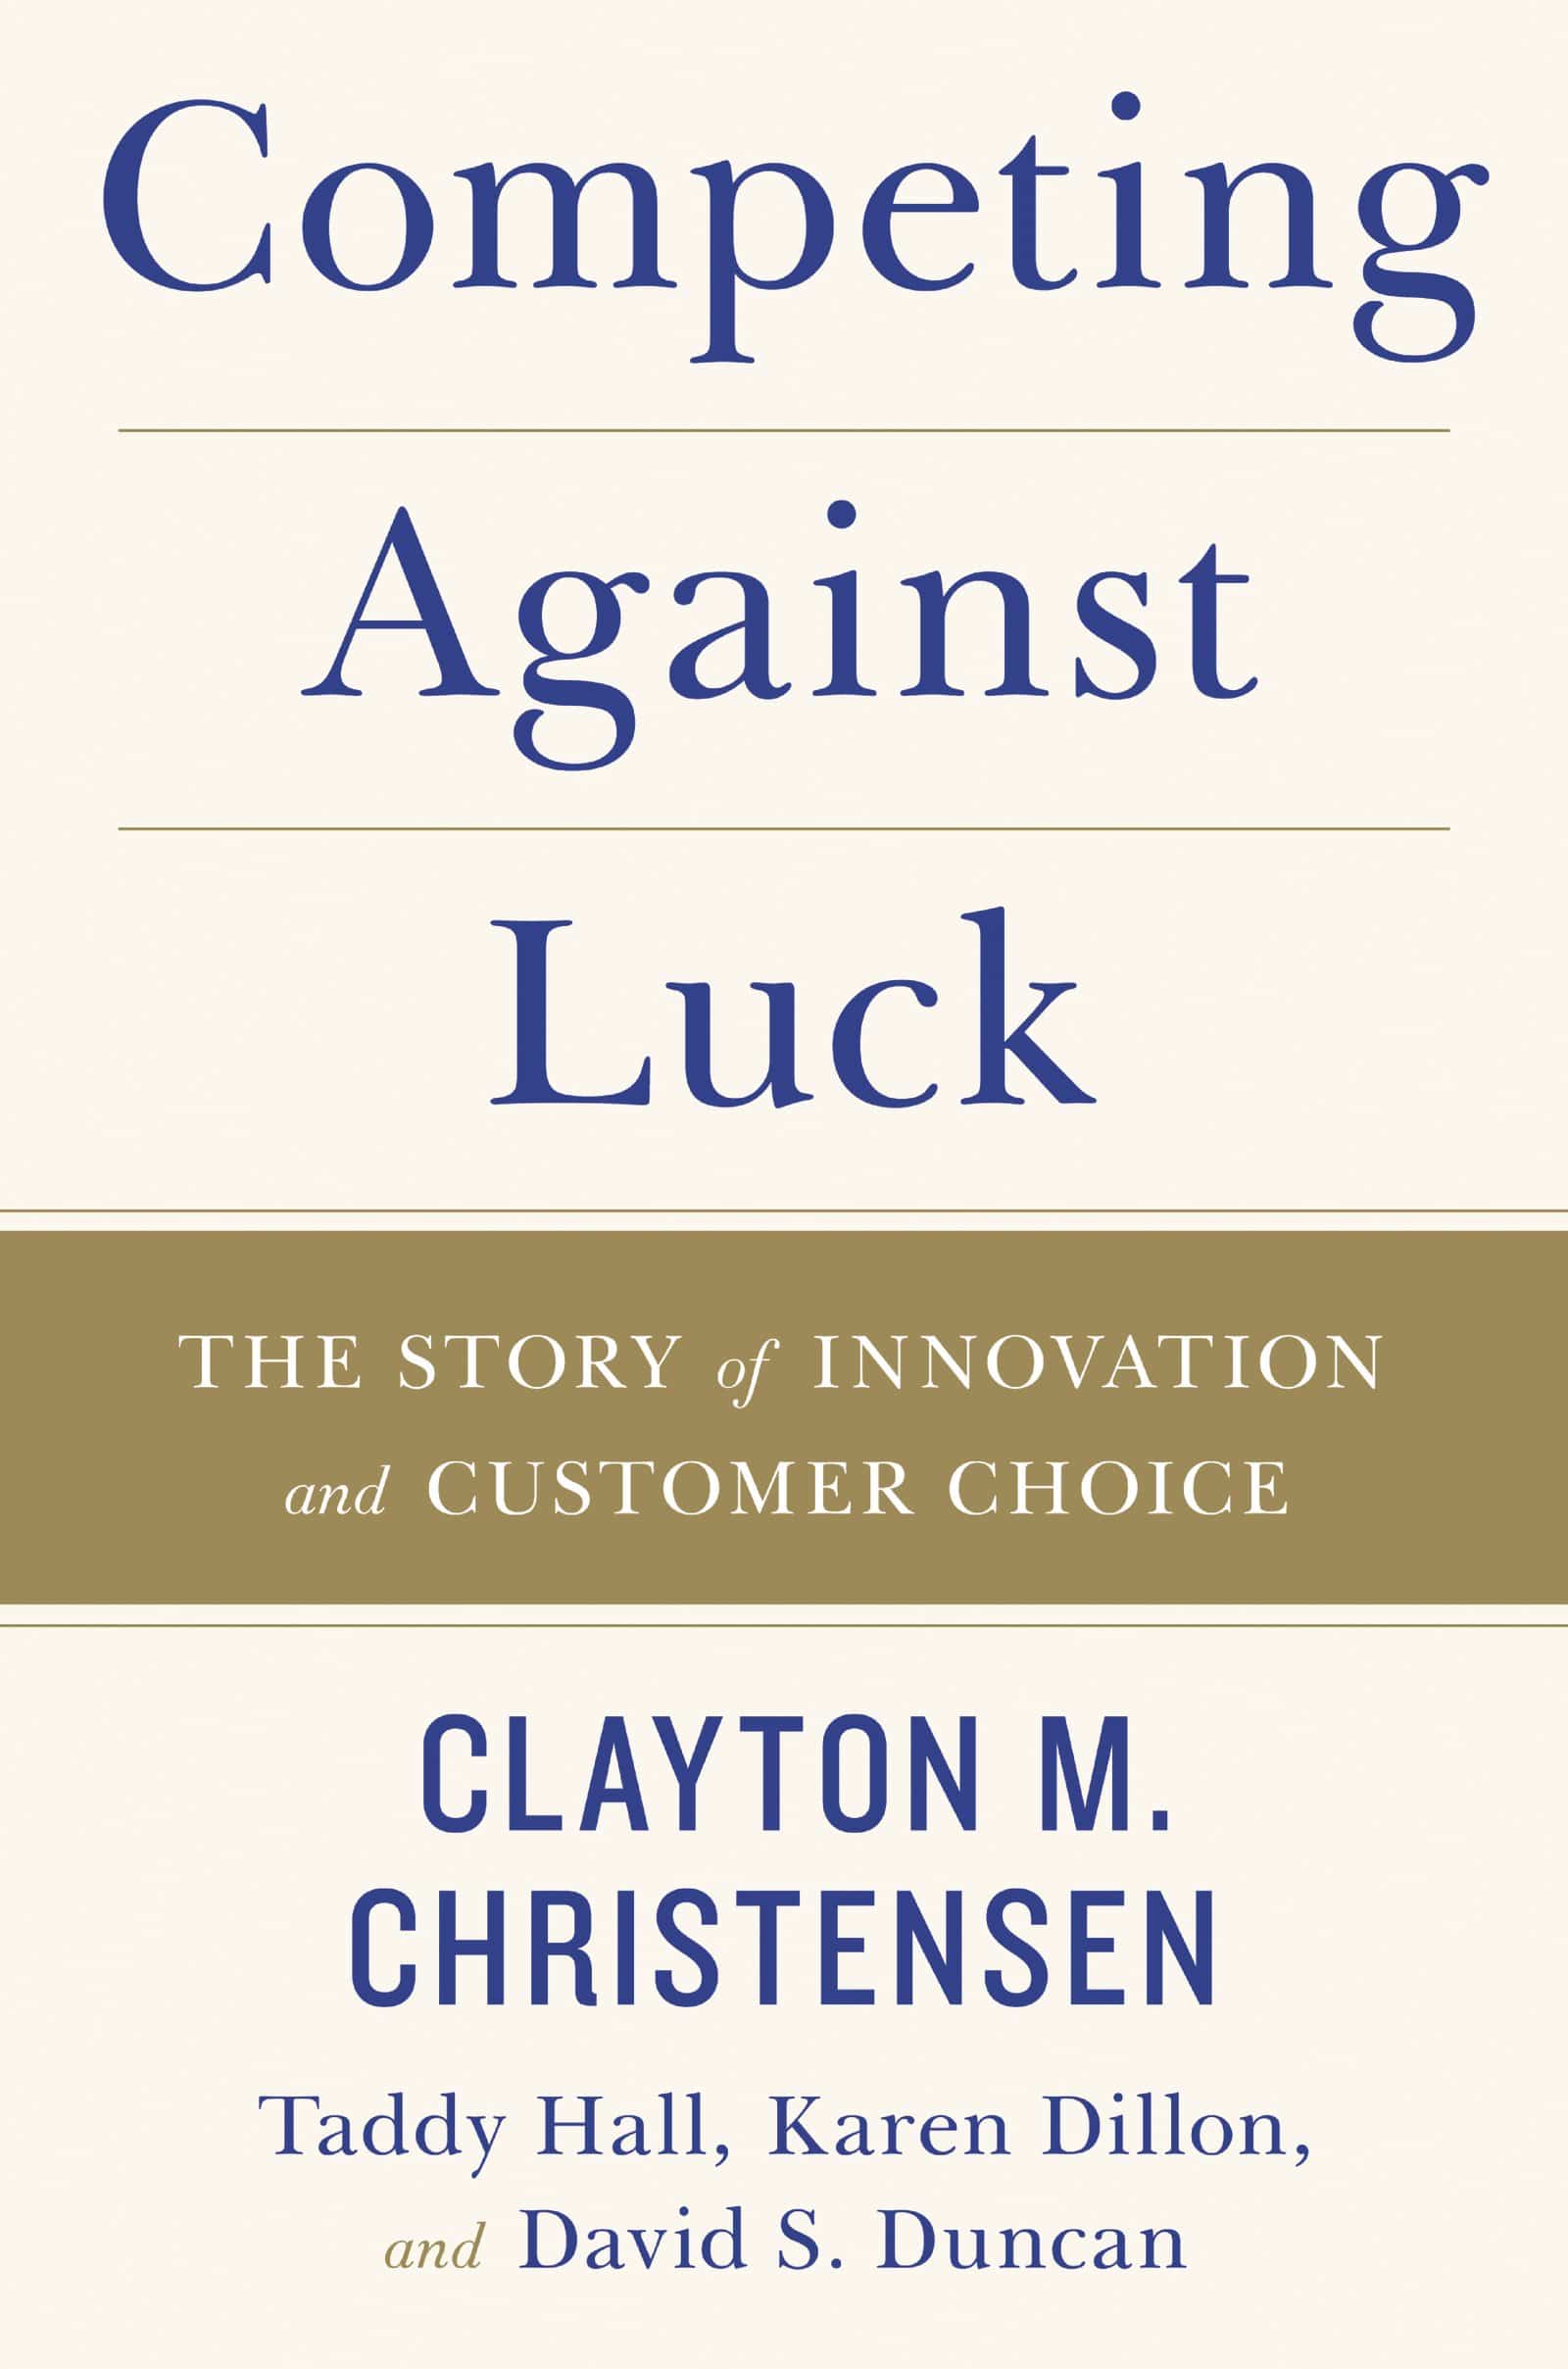 The cover of Competing Against Luck